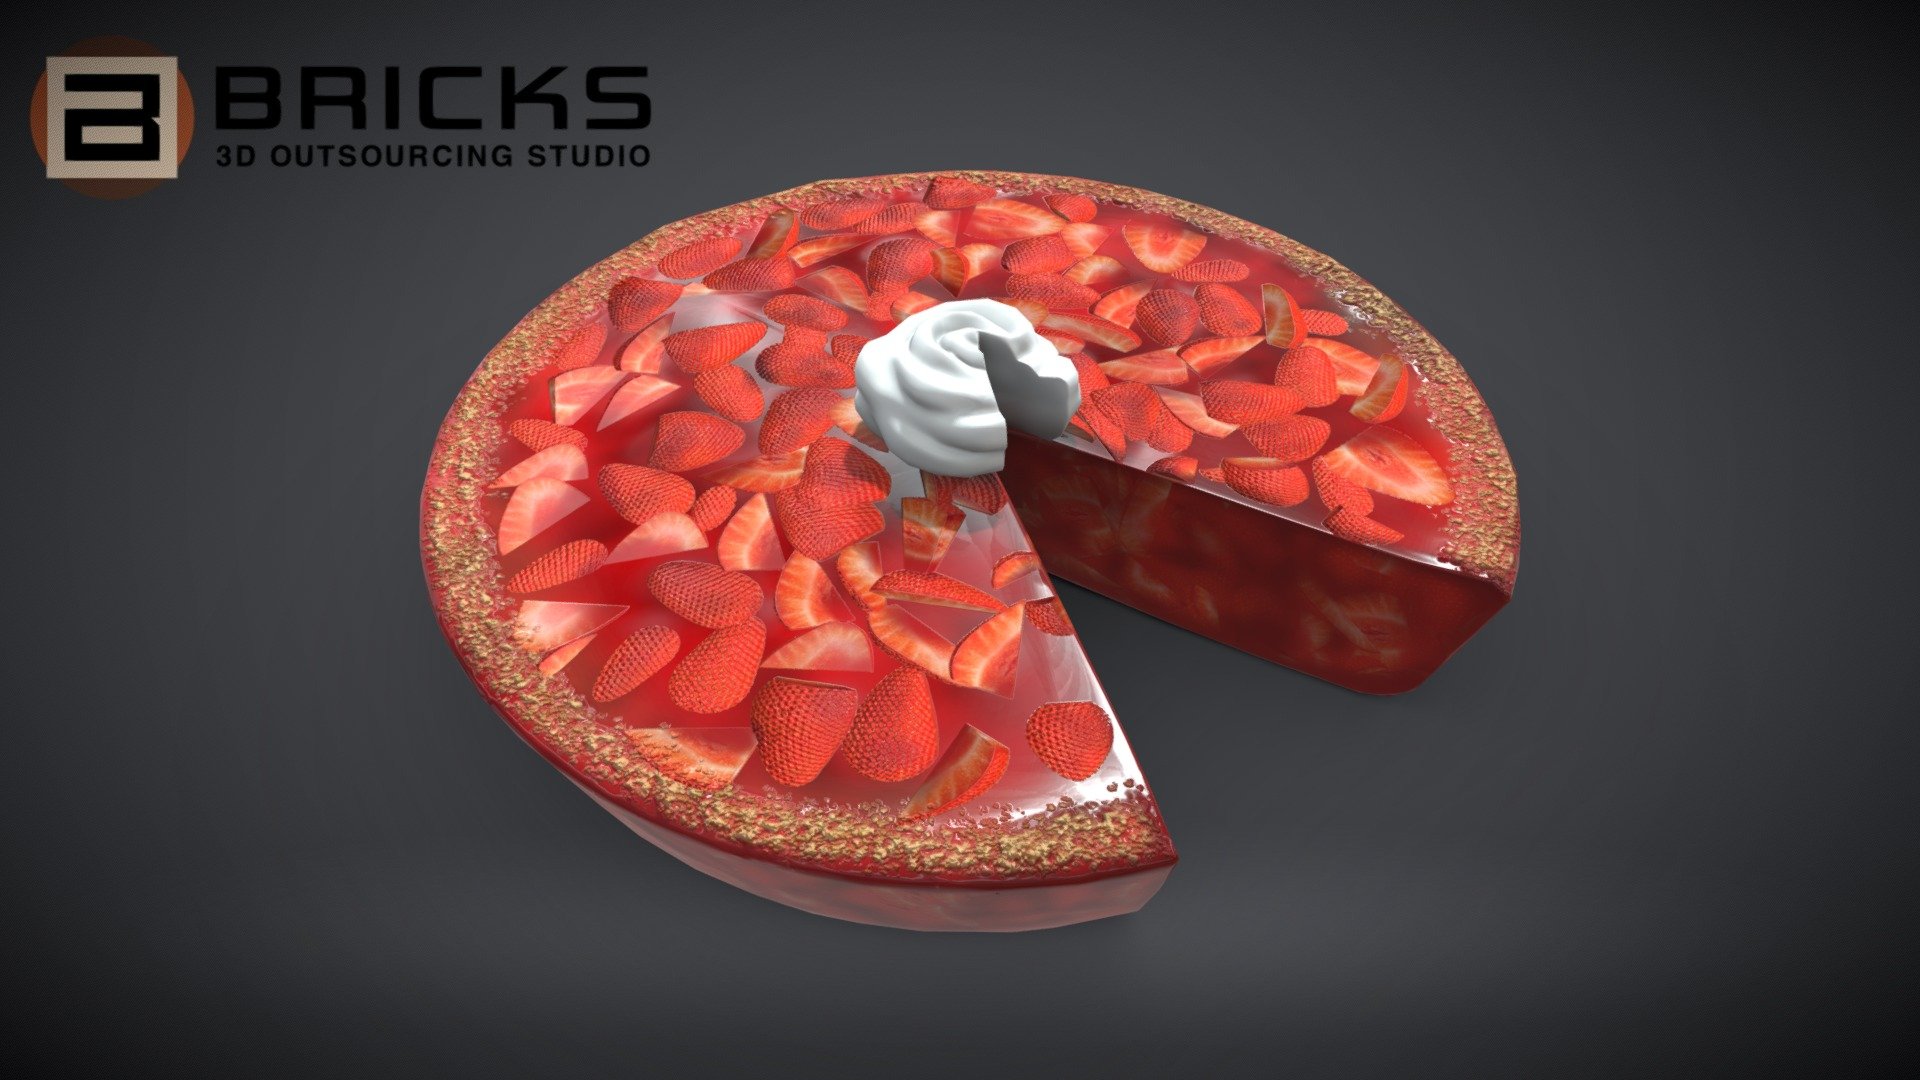 PBR Food Asset:
PieStrawberry_Chart
Polycount: 1536
Vertex count: 772
Texture Size: 2048px x 2048px
Normal: OpenGL

If you need any adjust in file please contact us: team@bricks3dstudio.com

Hire us: tringuyen@bricks3dstudio.com
Here is us: https://www.bricks3dstudio.com/
        https://www.artstation.com/bricksstudio
        https://www.facebook.com/Bricks3dstudio/
        https://www.linkedin.com/in/bricks-studio-b10462252/ - PieStrawberryChart - Buy Royalty Free 3D model by Bricks Studio (@bricks3dstudio) 3d model